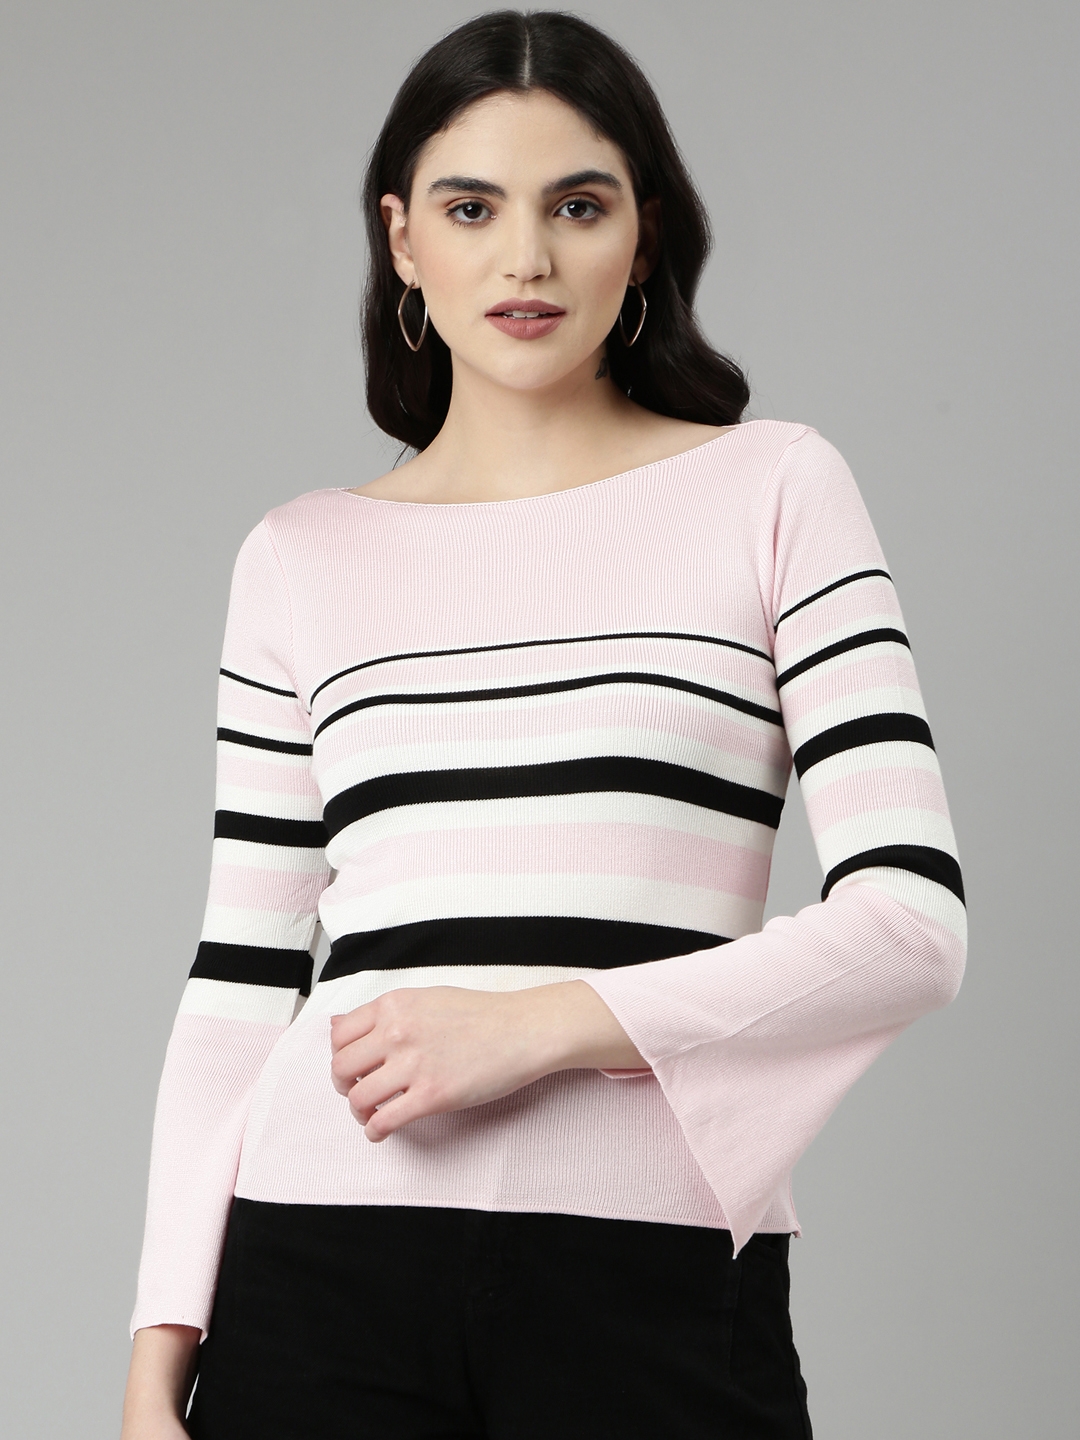 Showoff | SHOWOFF Women's Boat Neck Striped Bell Sleeves Fitted Pink Top 1